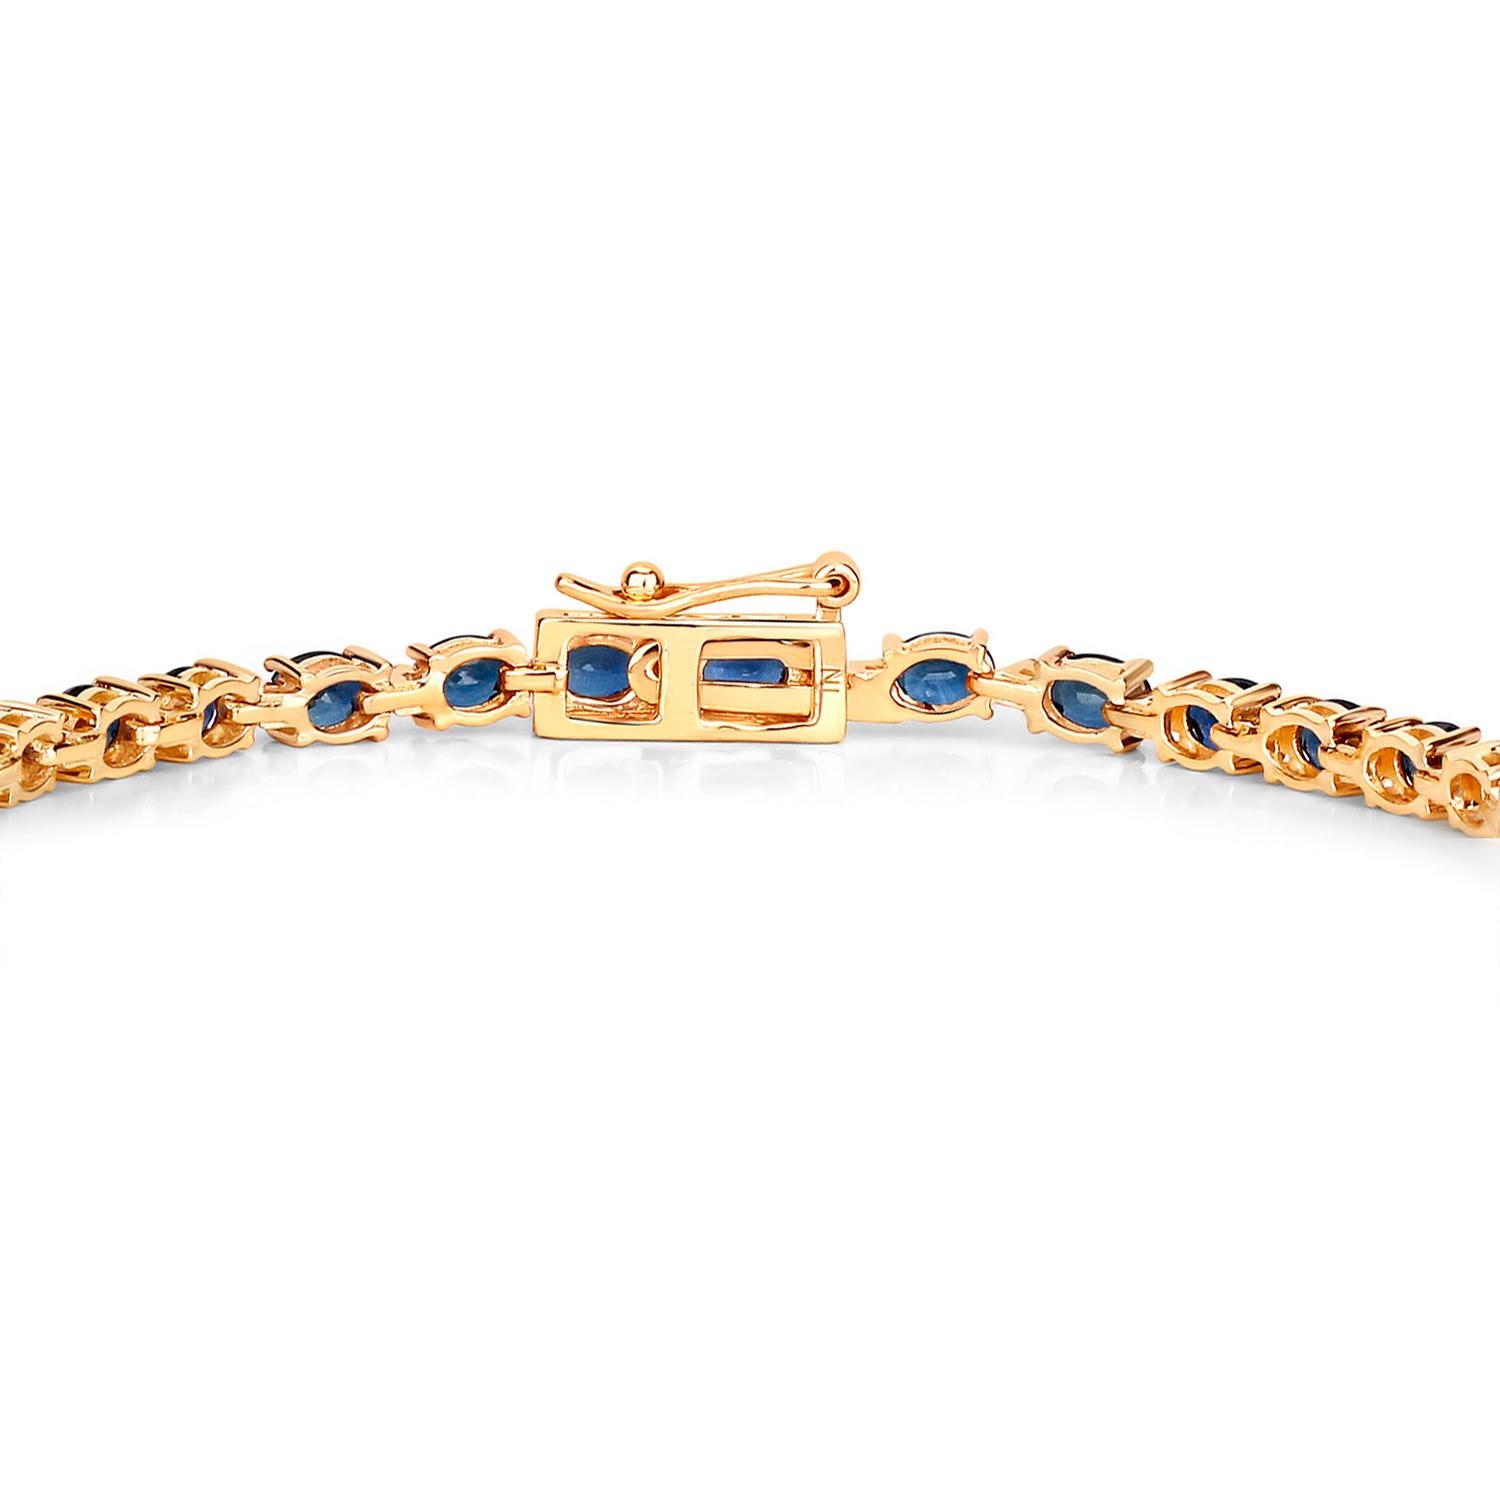 Blue Oval Cut Sapphires Bracelet Diamond Links 6.3 Carats 10K Yellow Gold In Excellent Condition For Sale In Laguna Niguel, CA